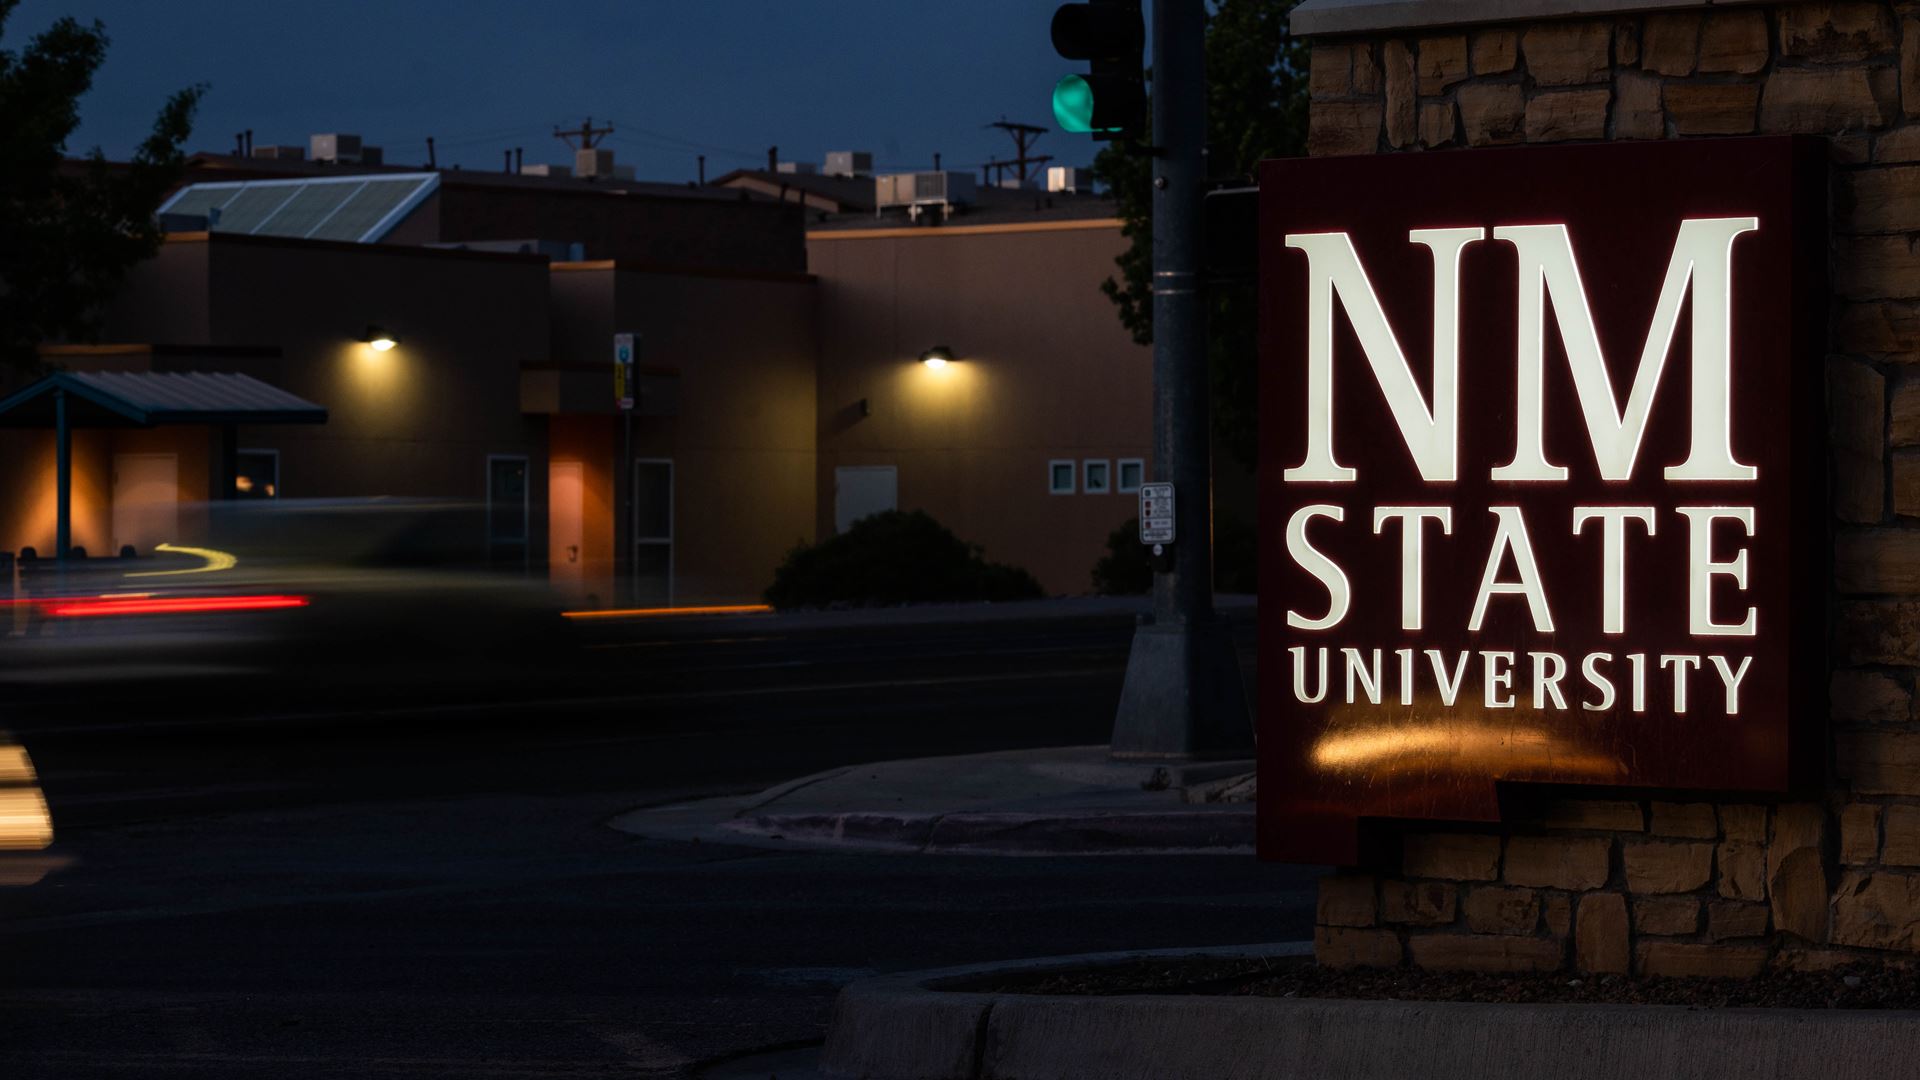 NMSU Board of Regents to hold regular meeting May 14